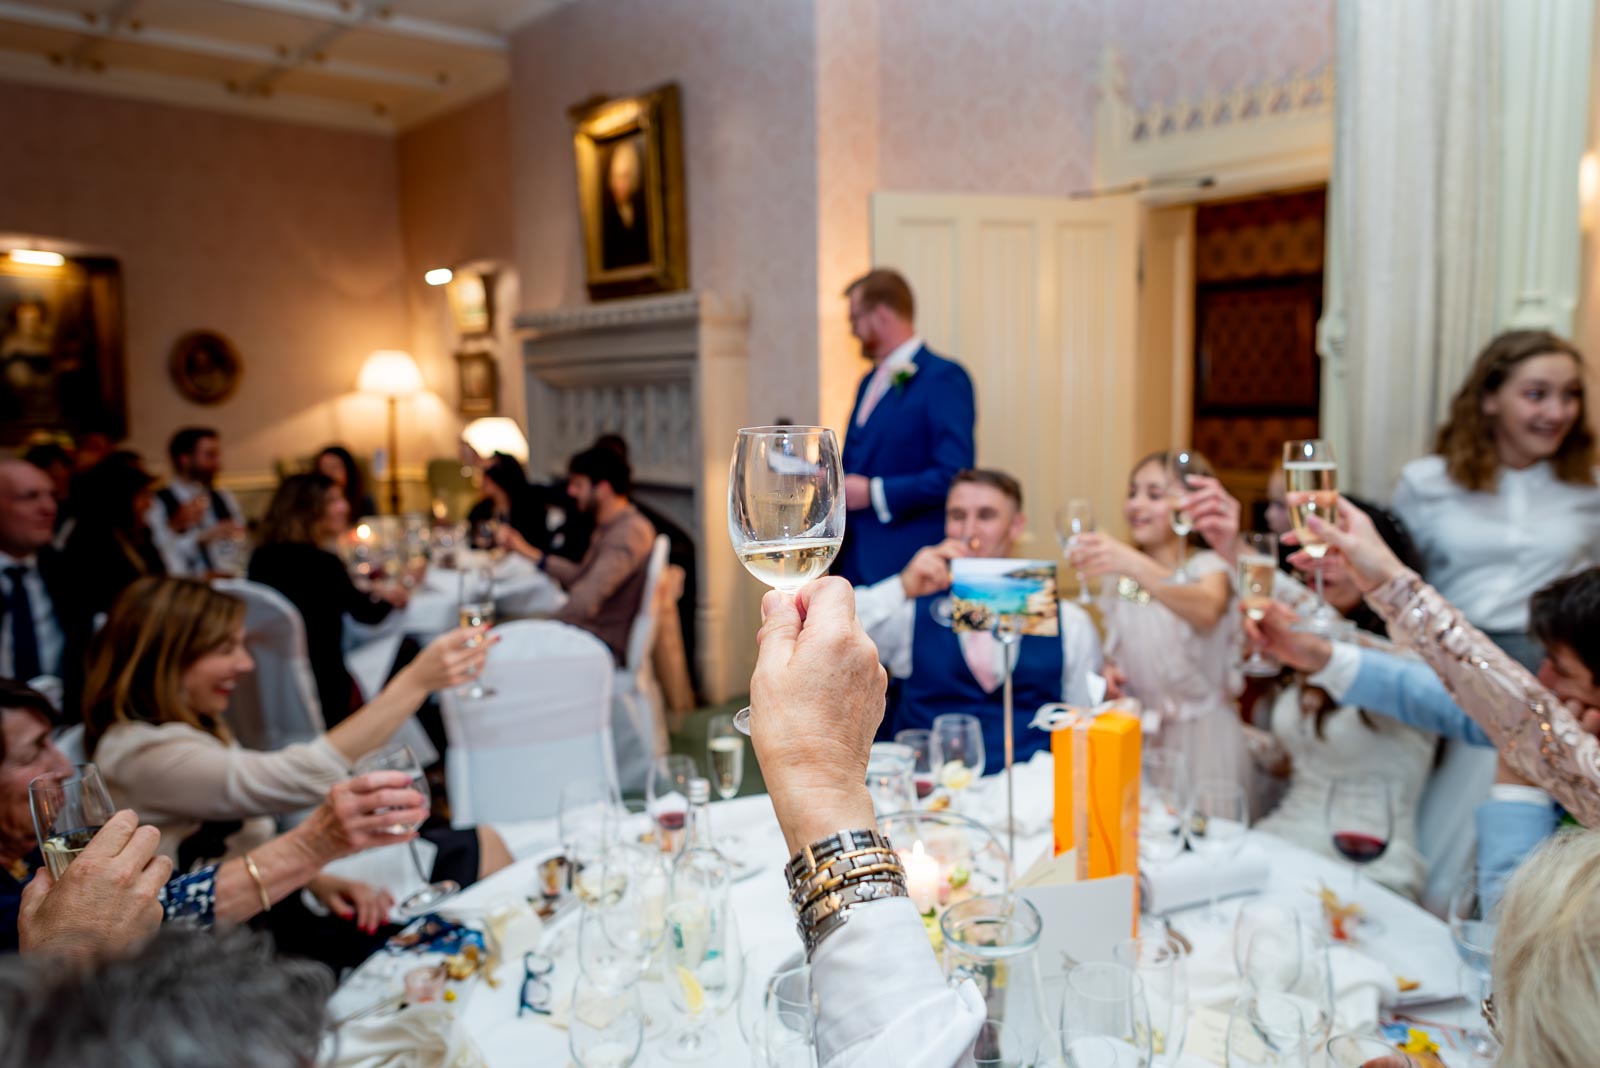 Wedding guests toast the bride and grrom during their Wedding Reception at Horsted Place Hotel.